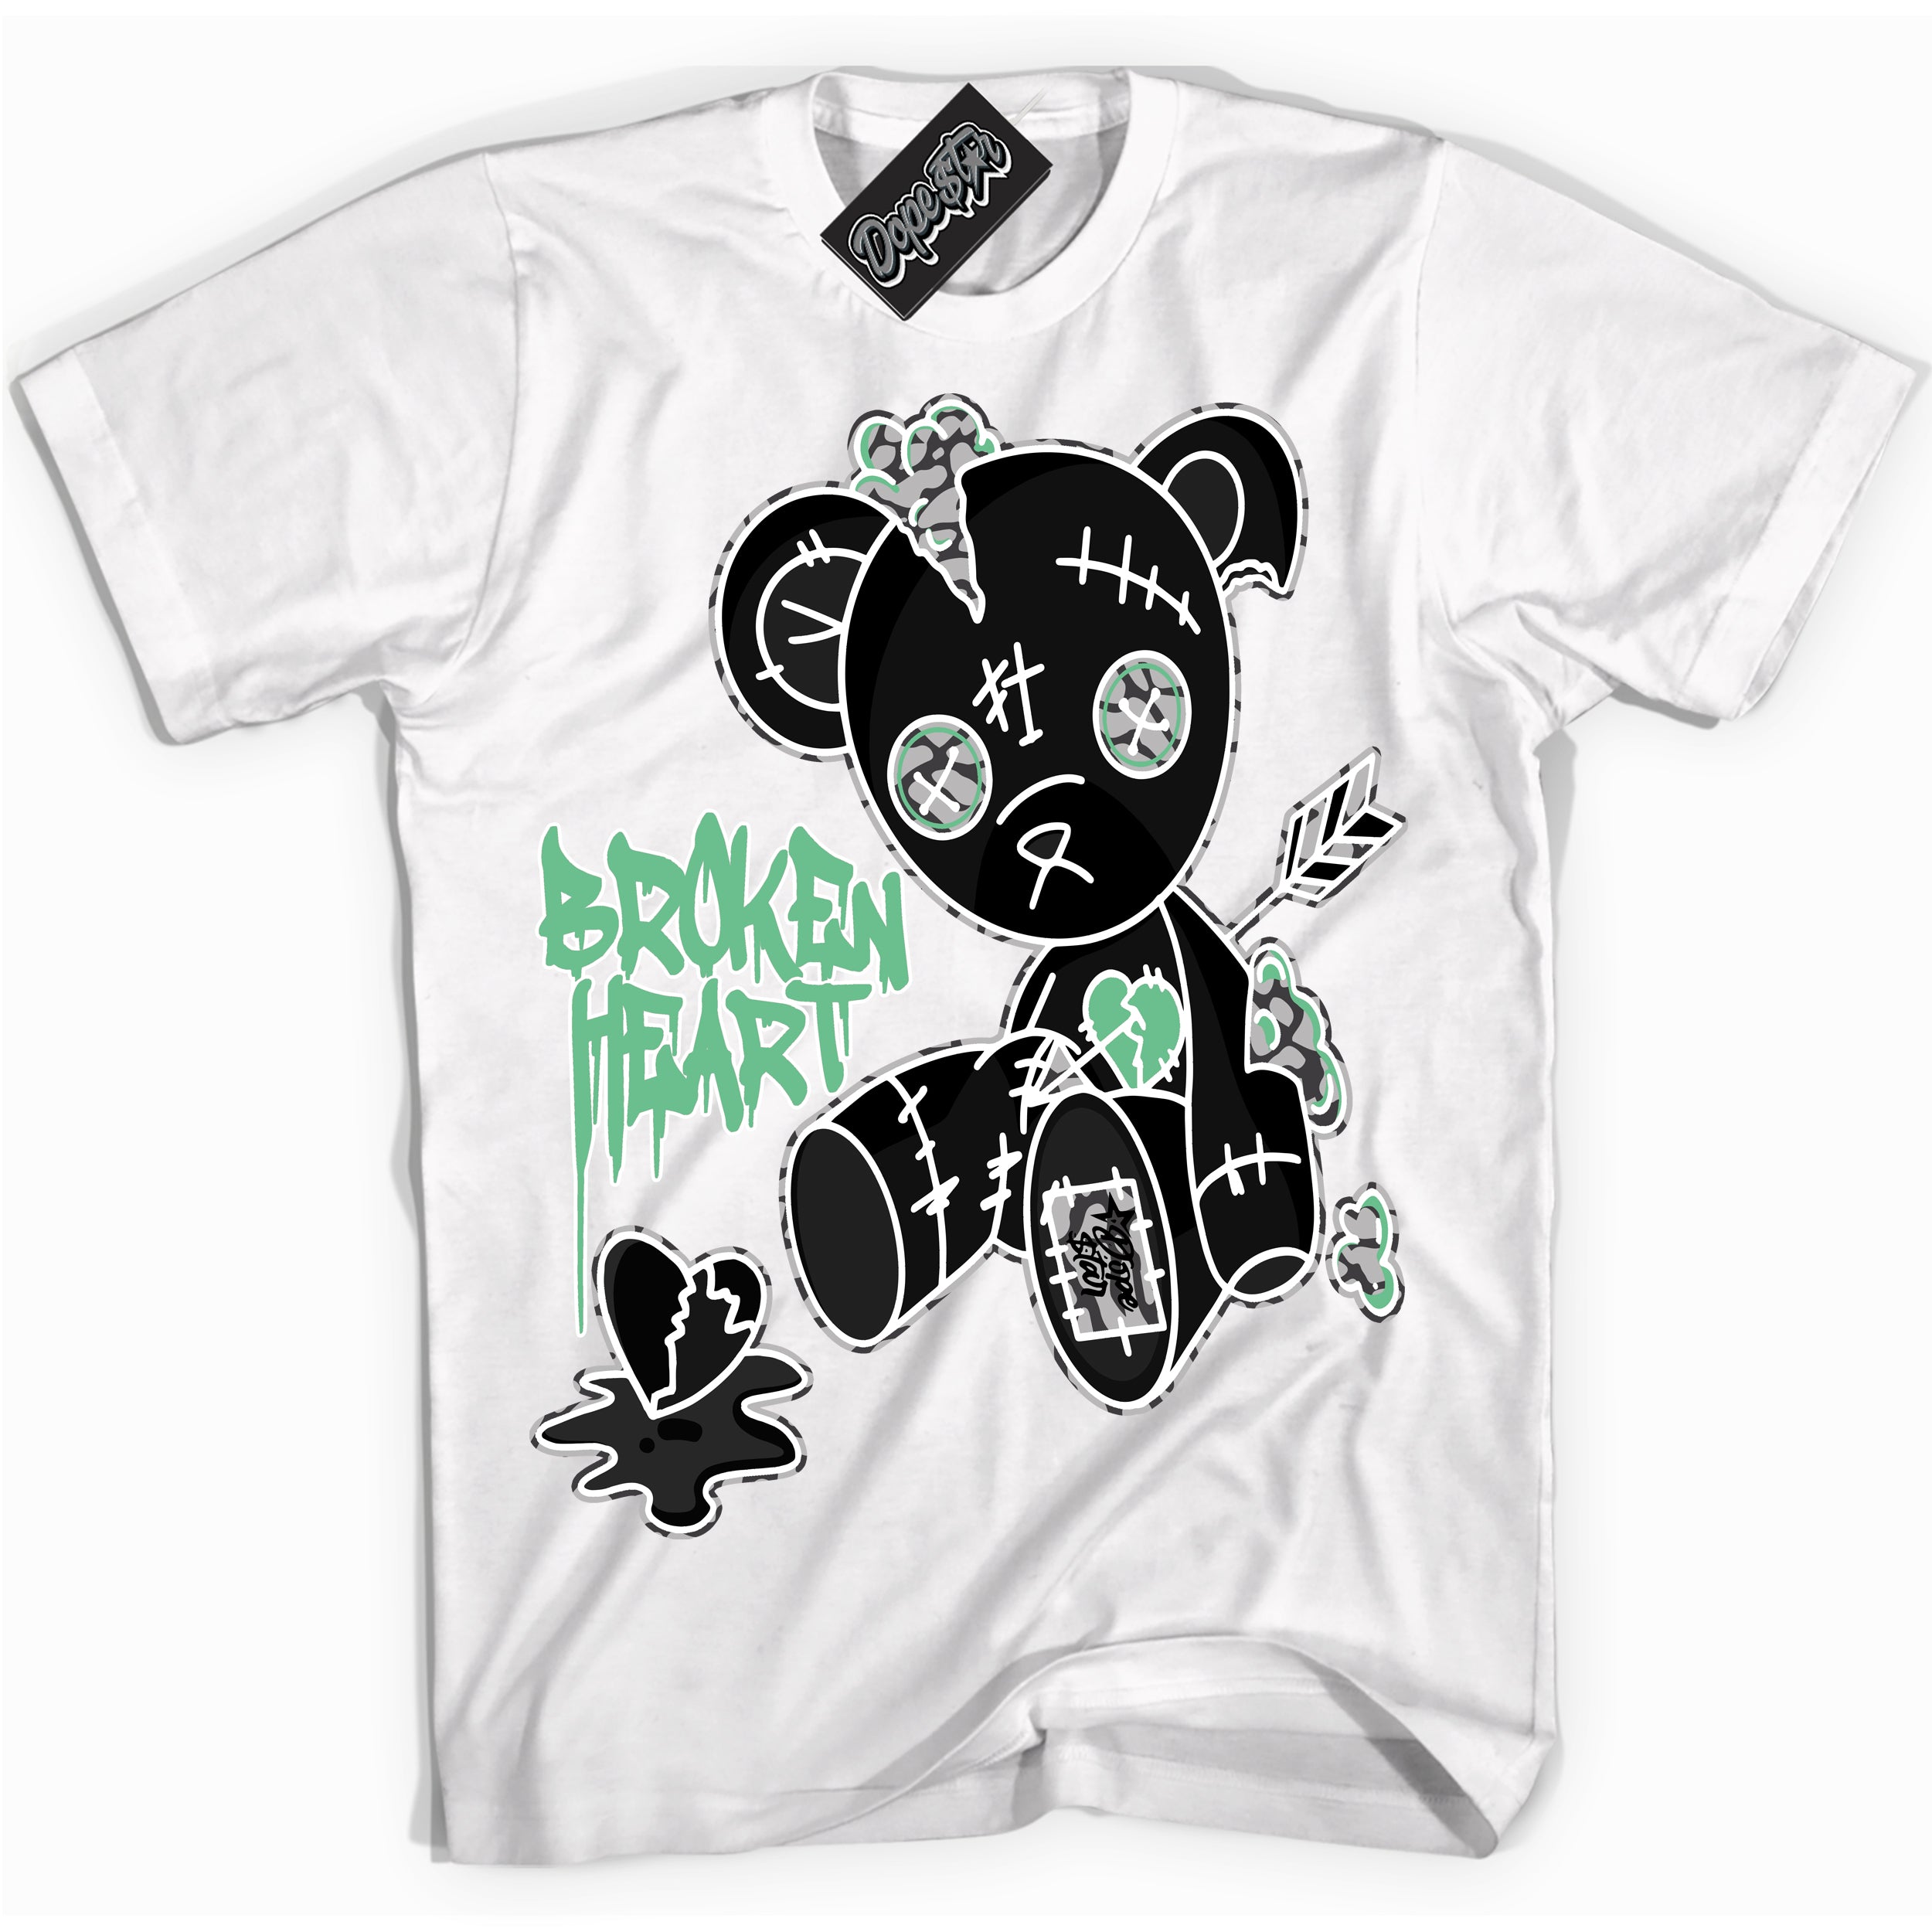 Cool White graphic tee with “ Broken Heart Bear ” design, that perfectly matches Green Glow 3s sneakers 